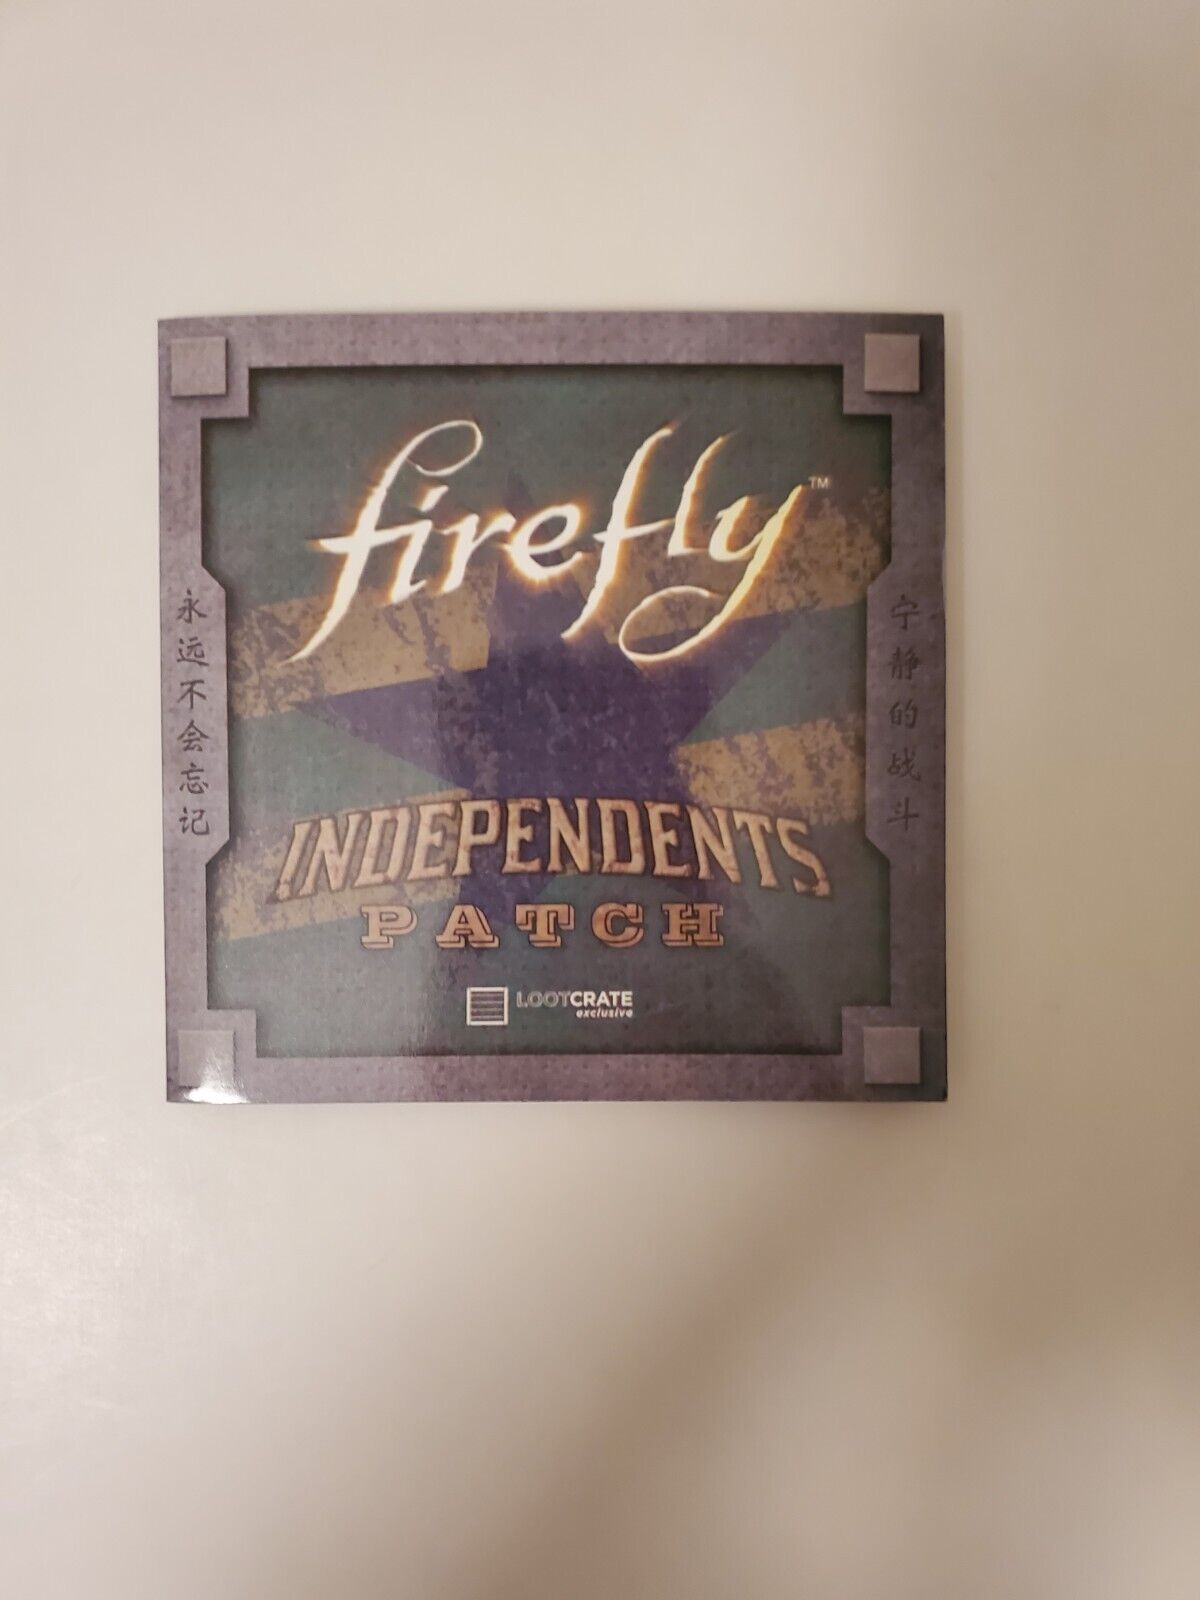 Firefly Independence Patch Loot Crate December 2016 Revolution New